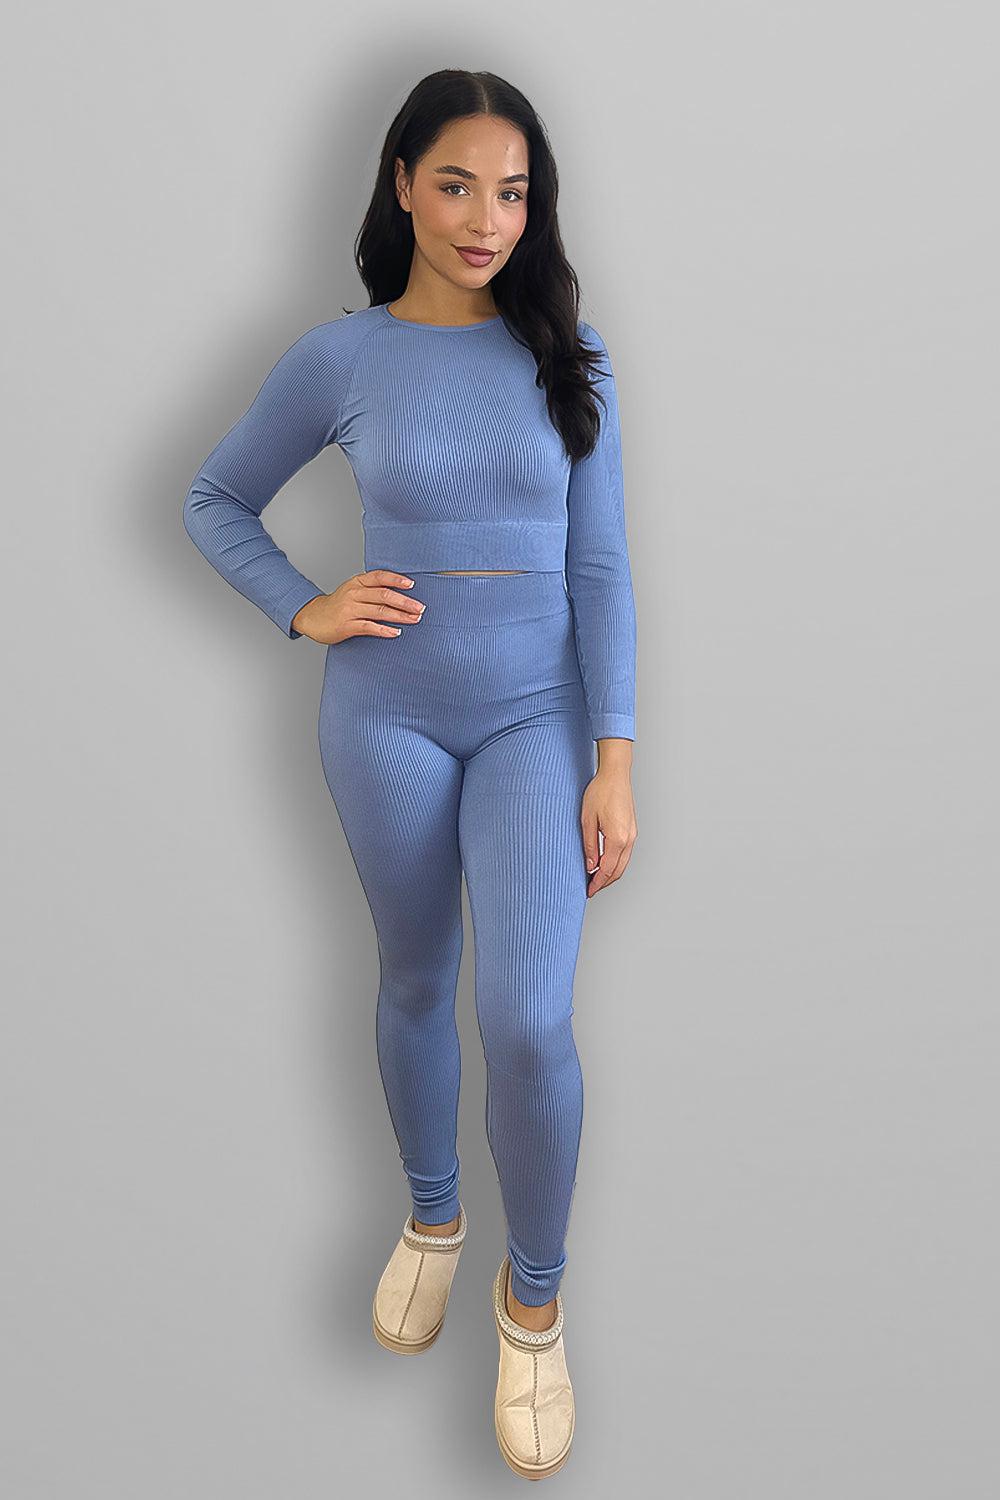 Stretchy Ribbed Long Sleeve Top and Leggings Activewear Set